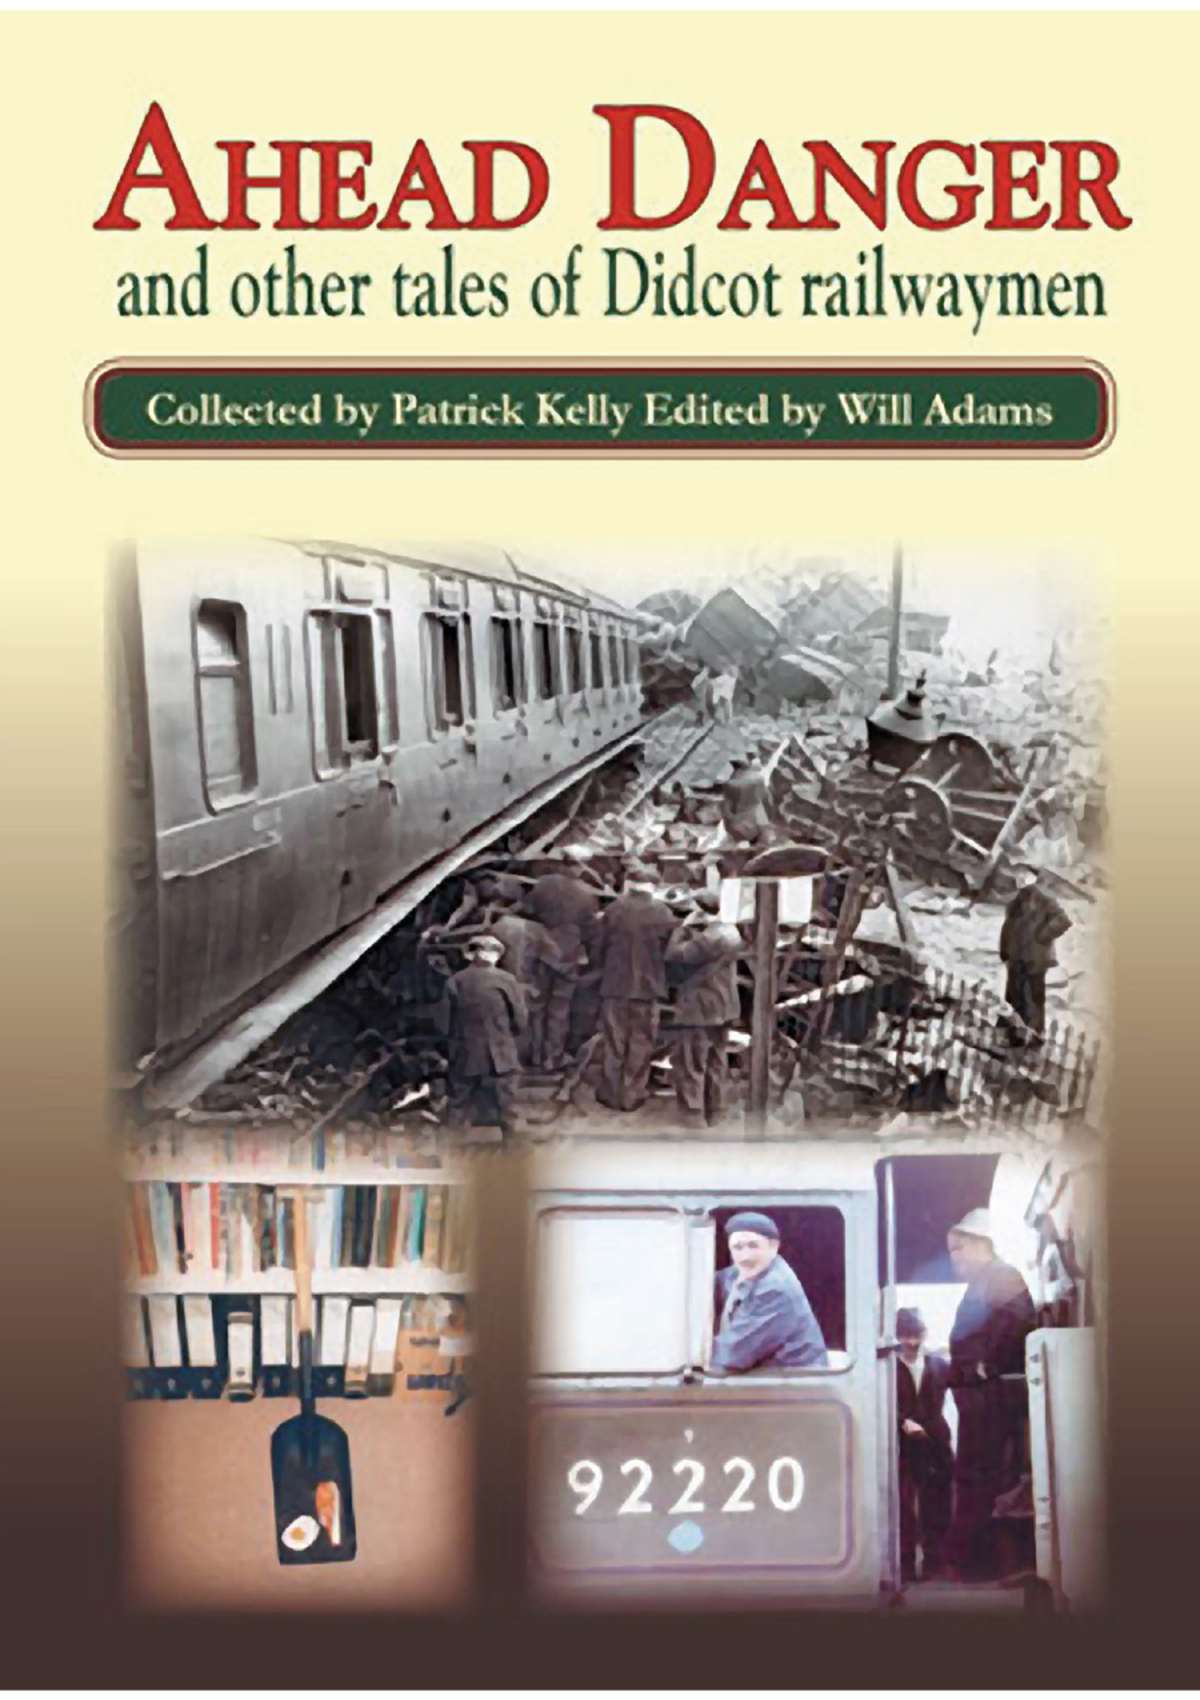 5355 - AHEAD DANGER and other tales of Didcot railwaymen